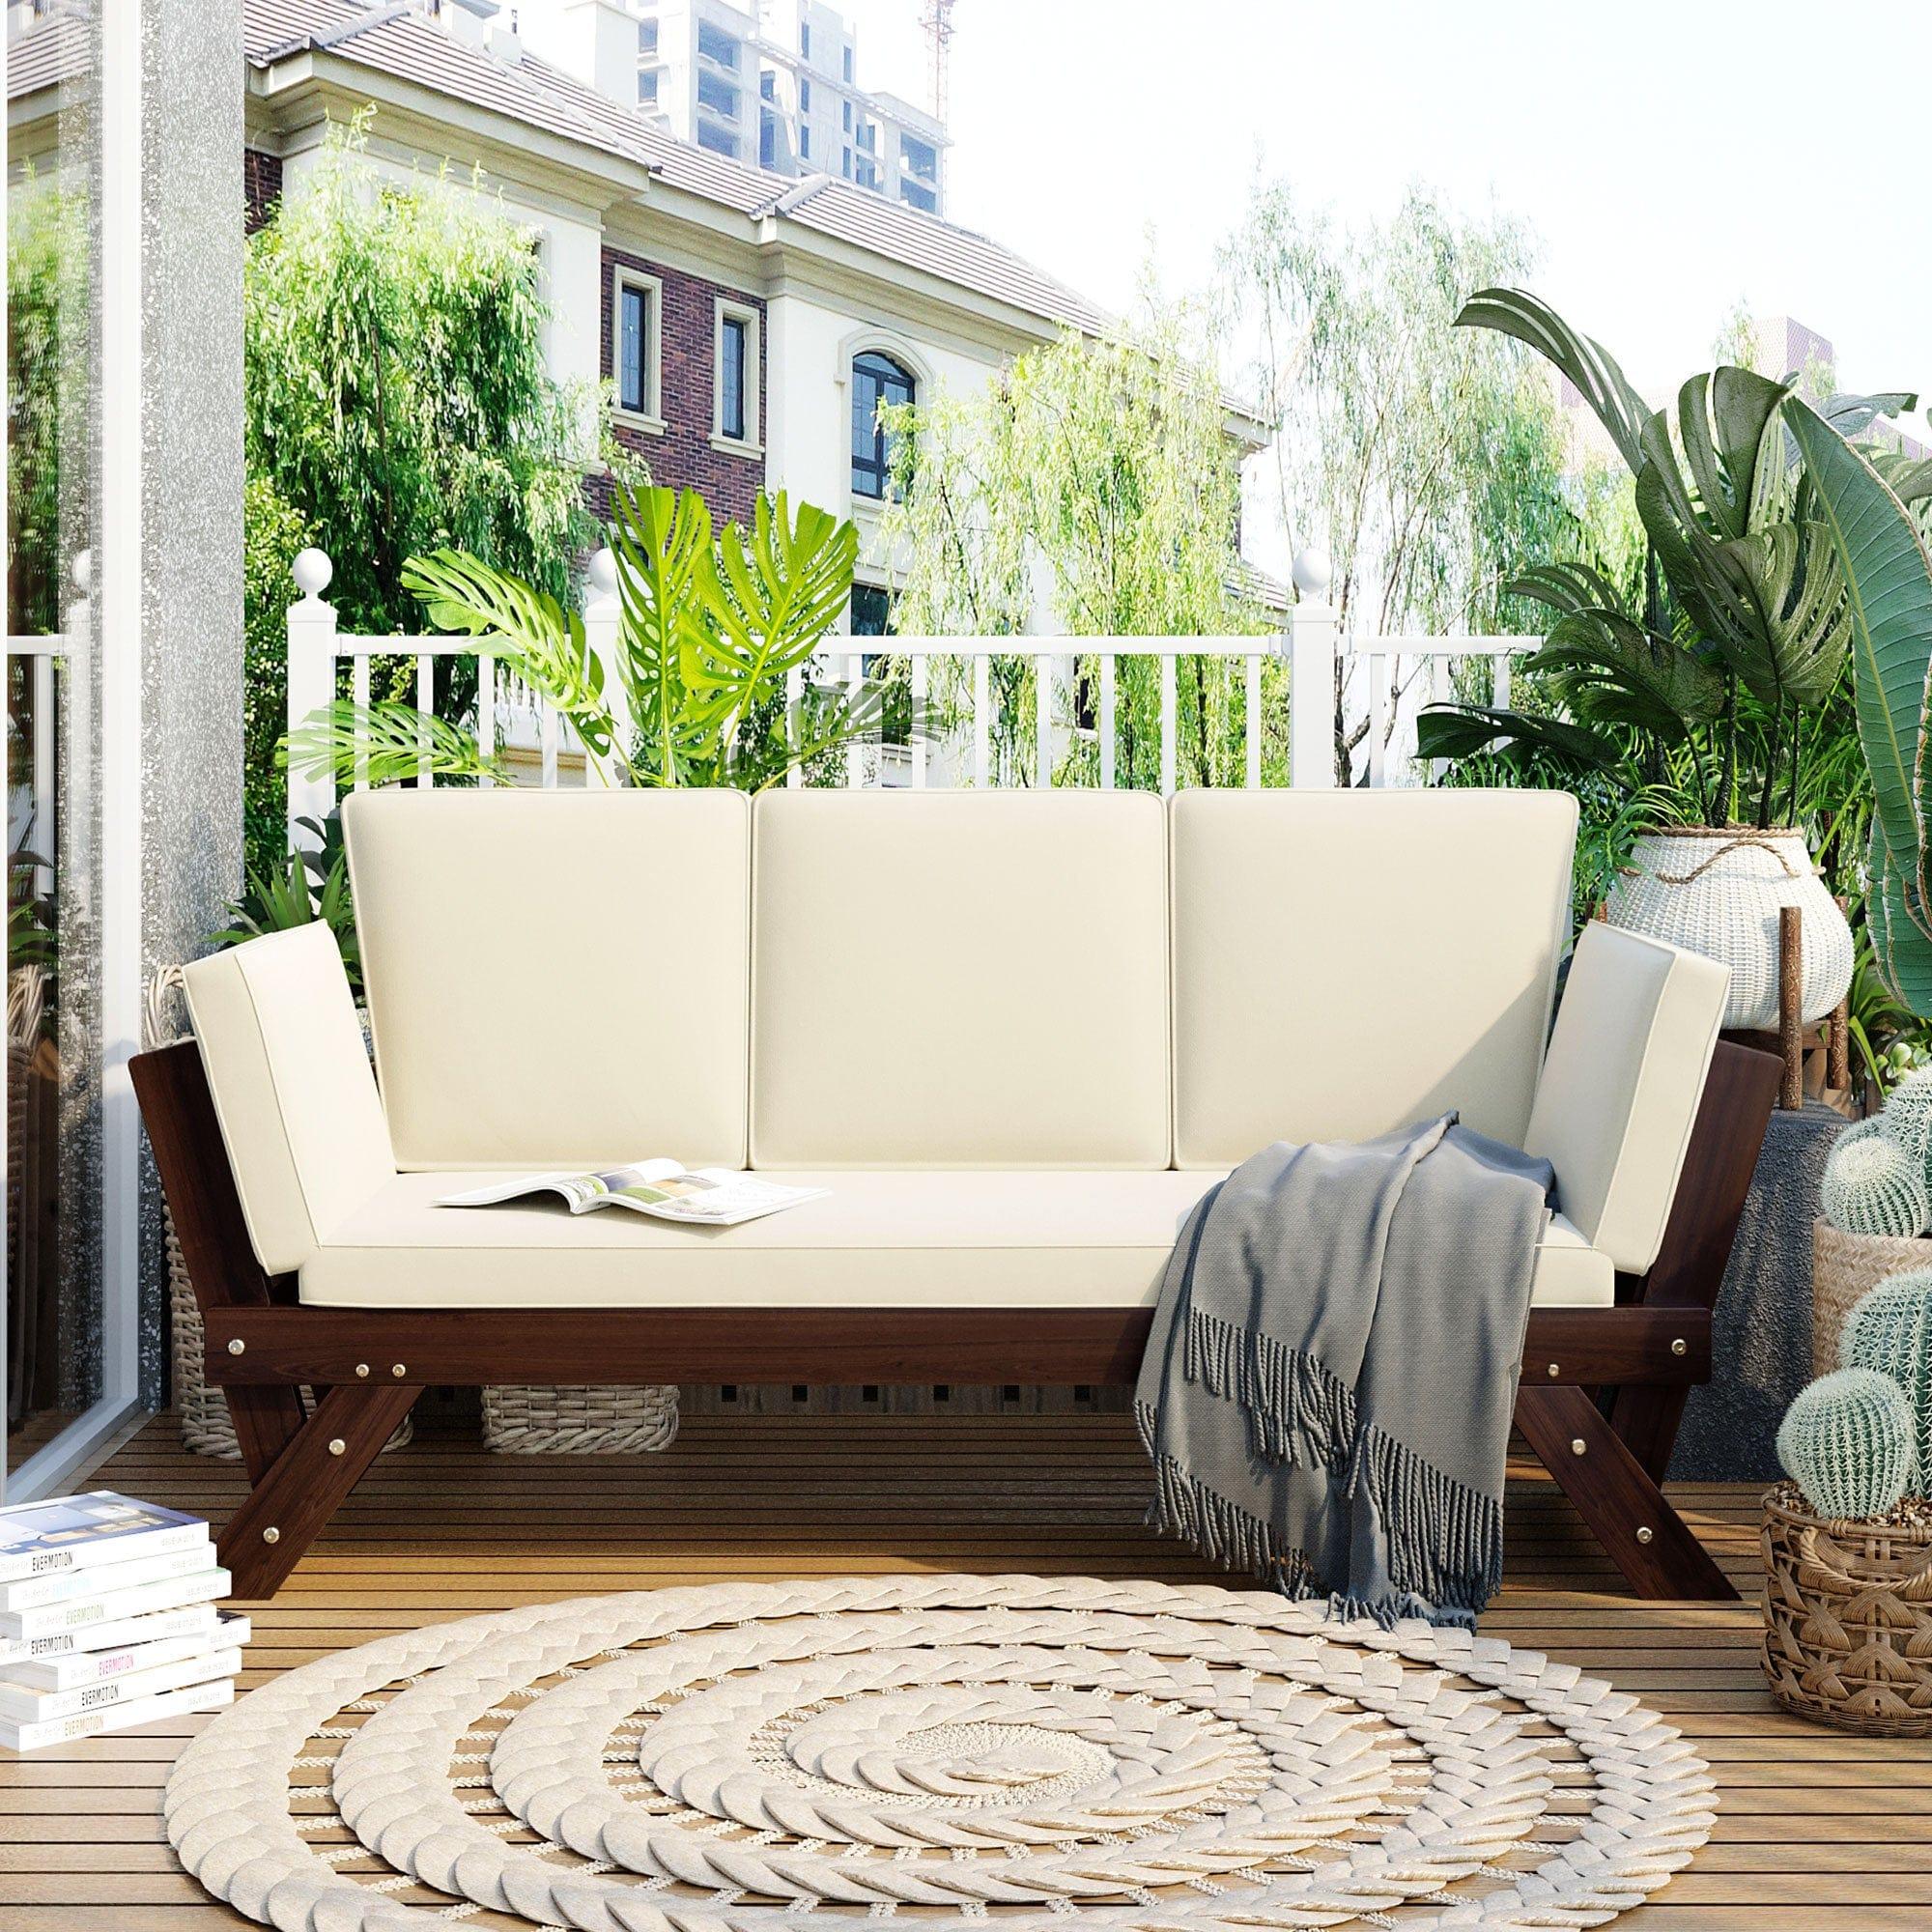 Shop TOPMAX Outdoor Adjustable Patio Wooden Daybed Sofa Chaise Lounge with Cushions for Small Places, Brown Finish+Beige Cushion Mademoiselle Home Decor